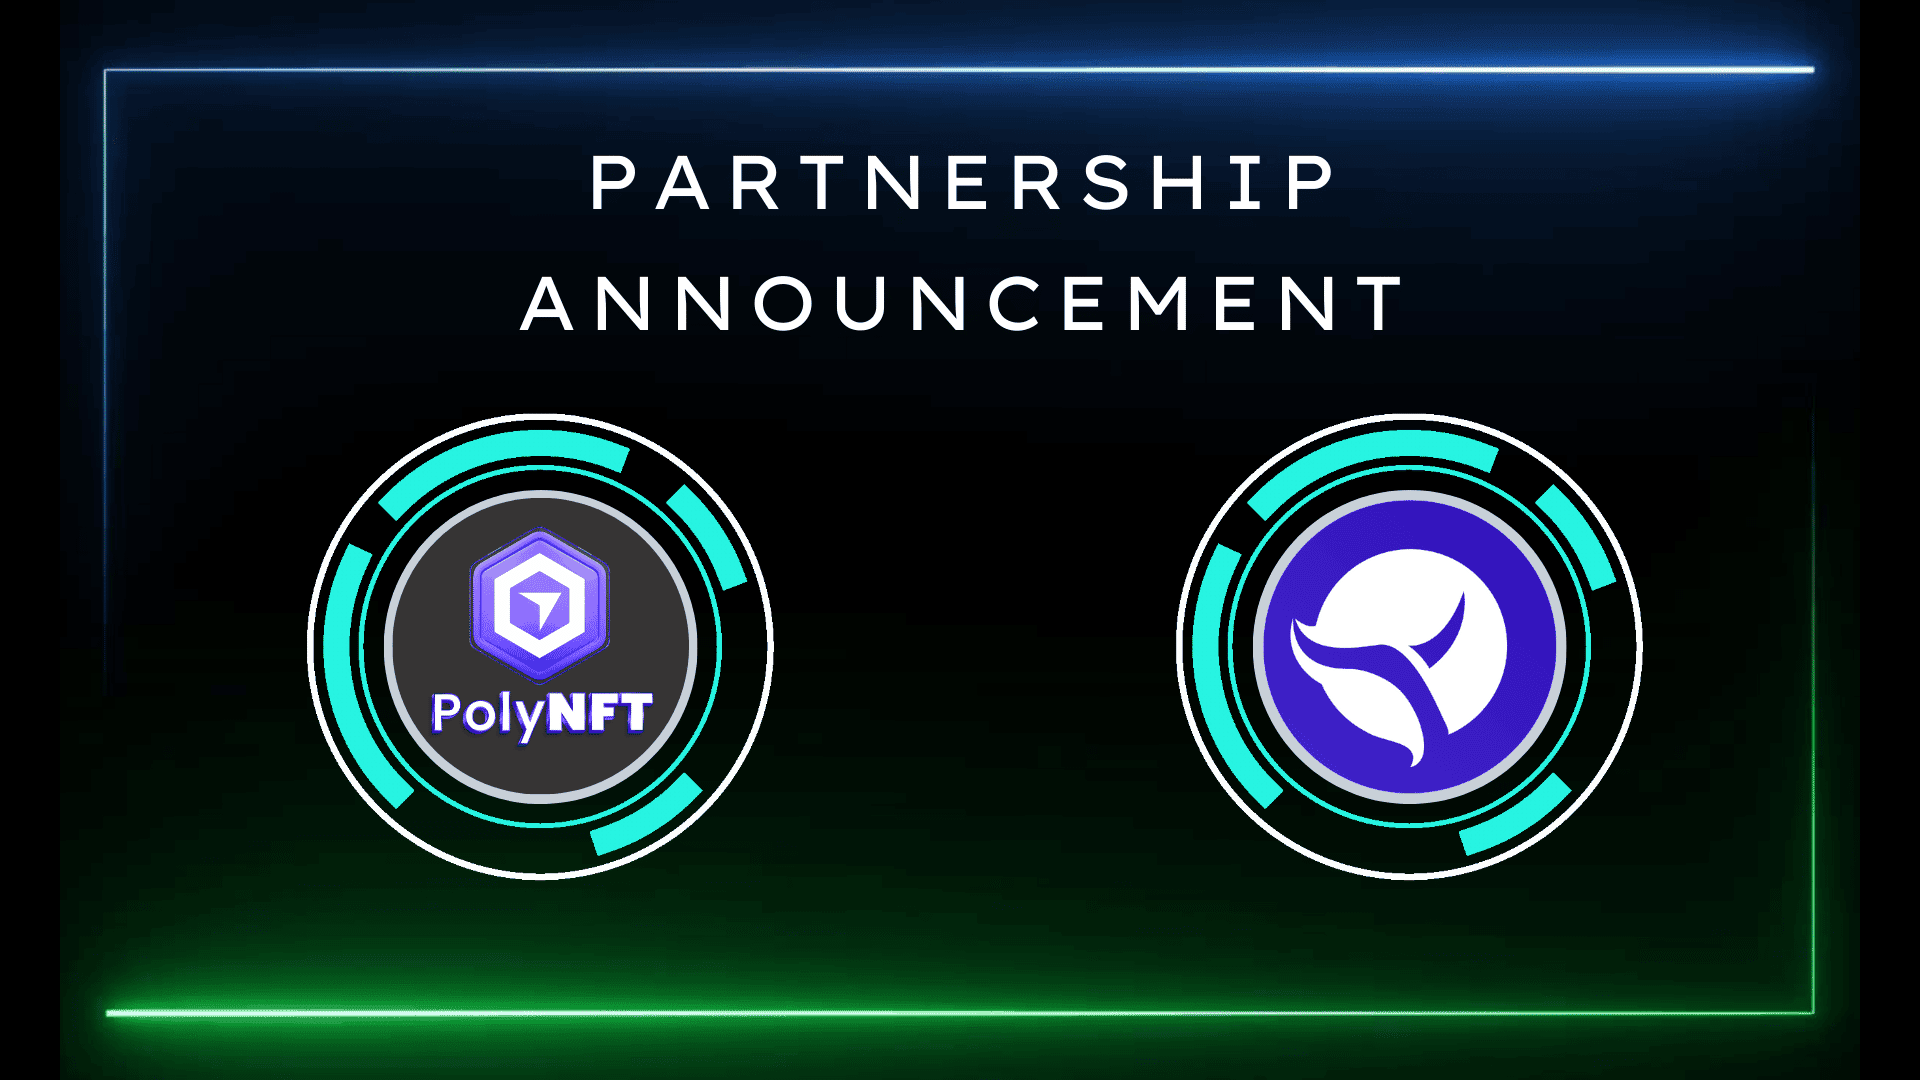 Wallacy Wallet Announces a Partnership with PolyNFT